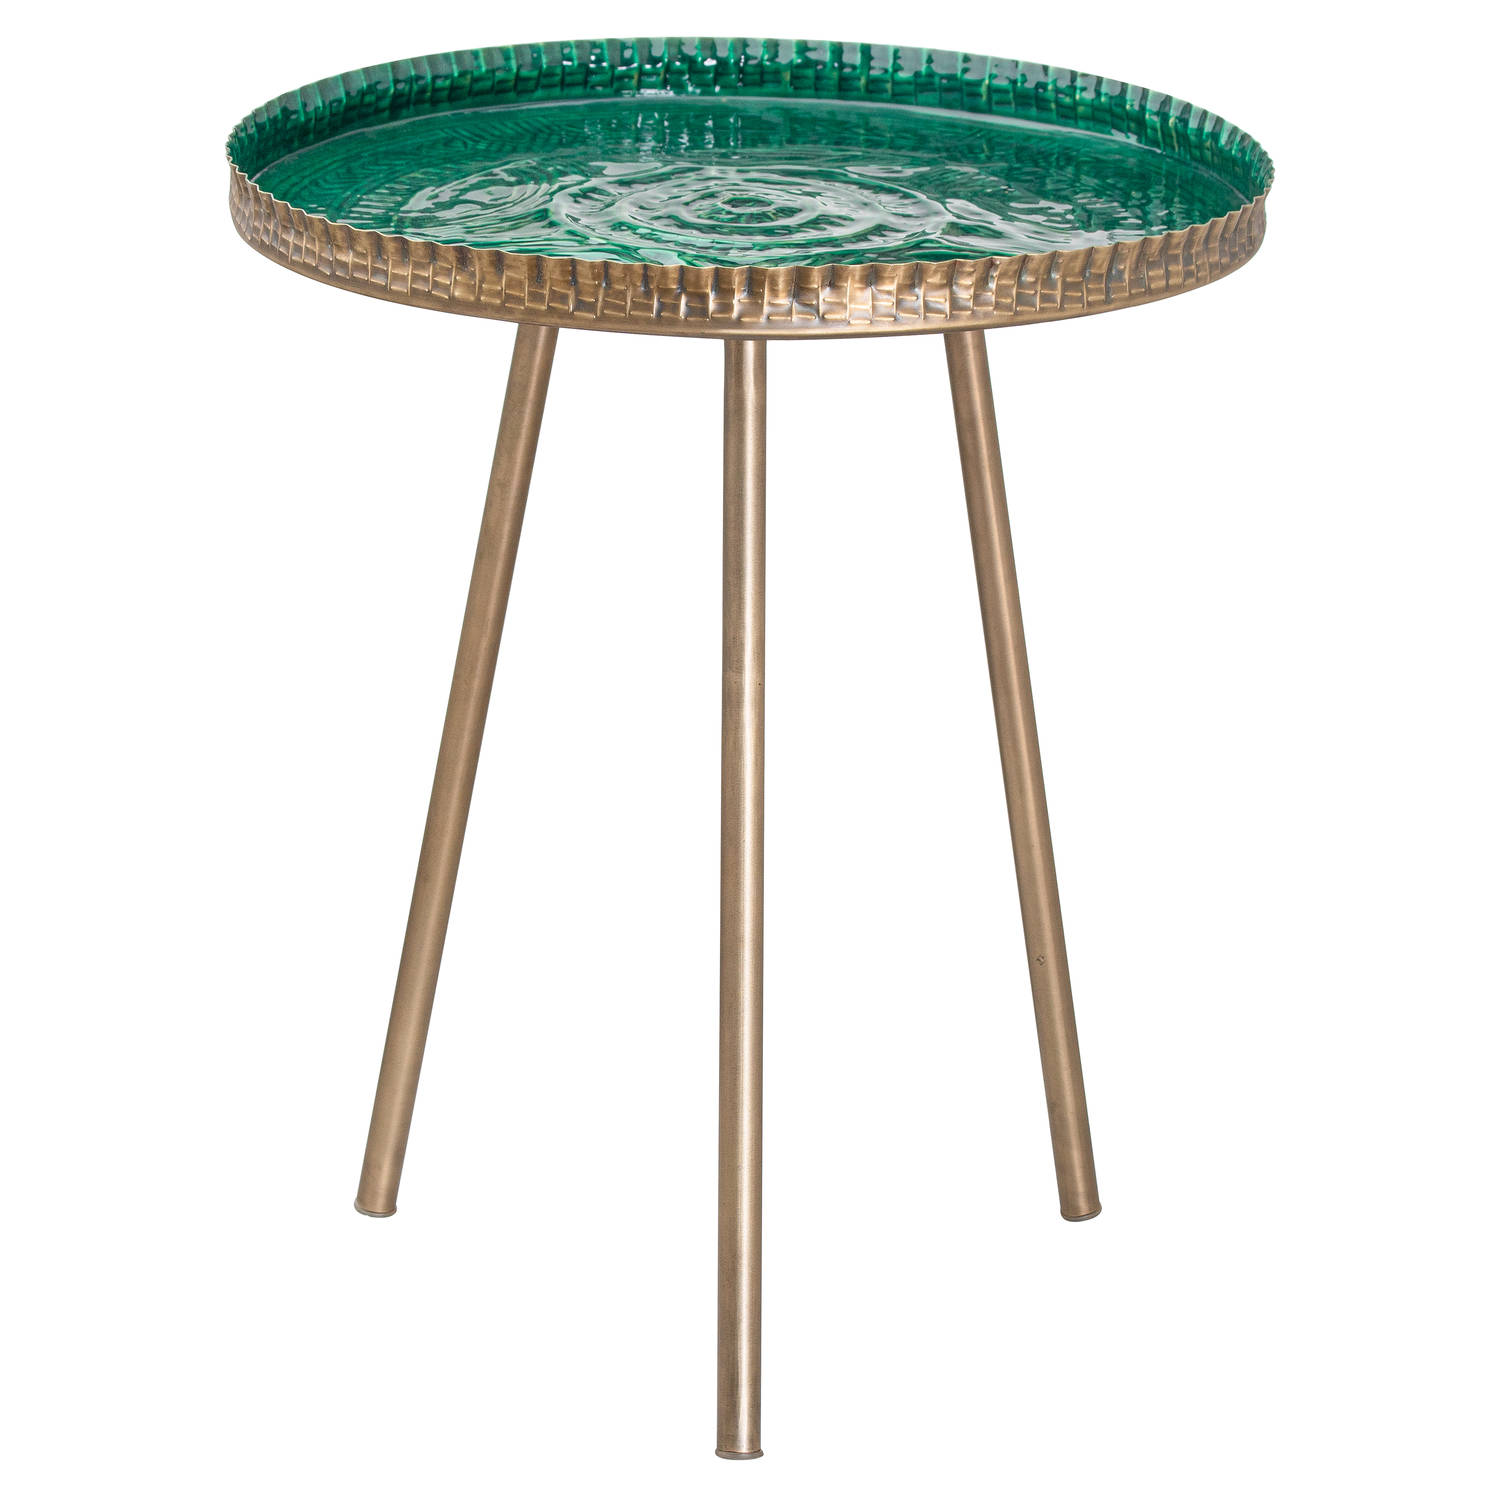 Aztec Collection Brass Embossed ceramic Dipped Side Table - Image 1